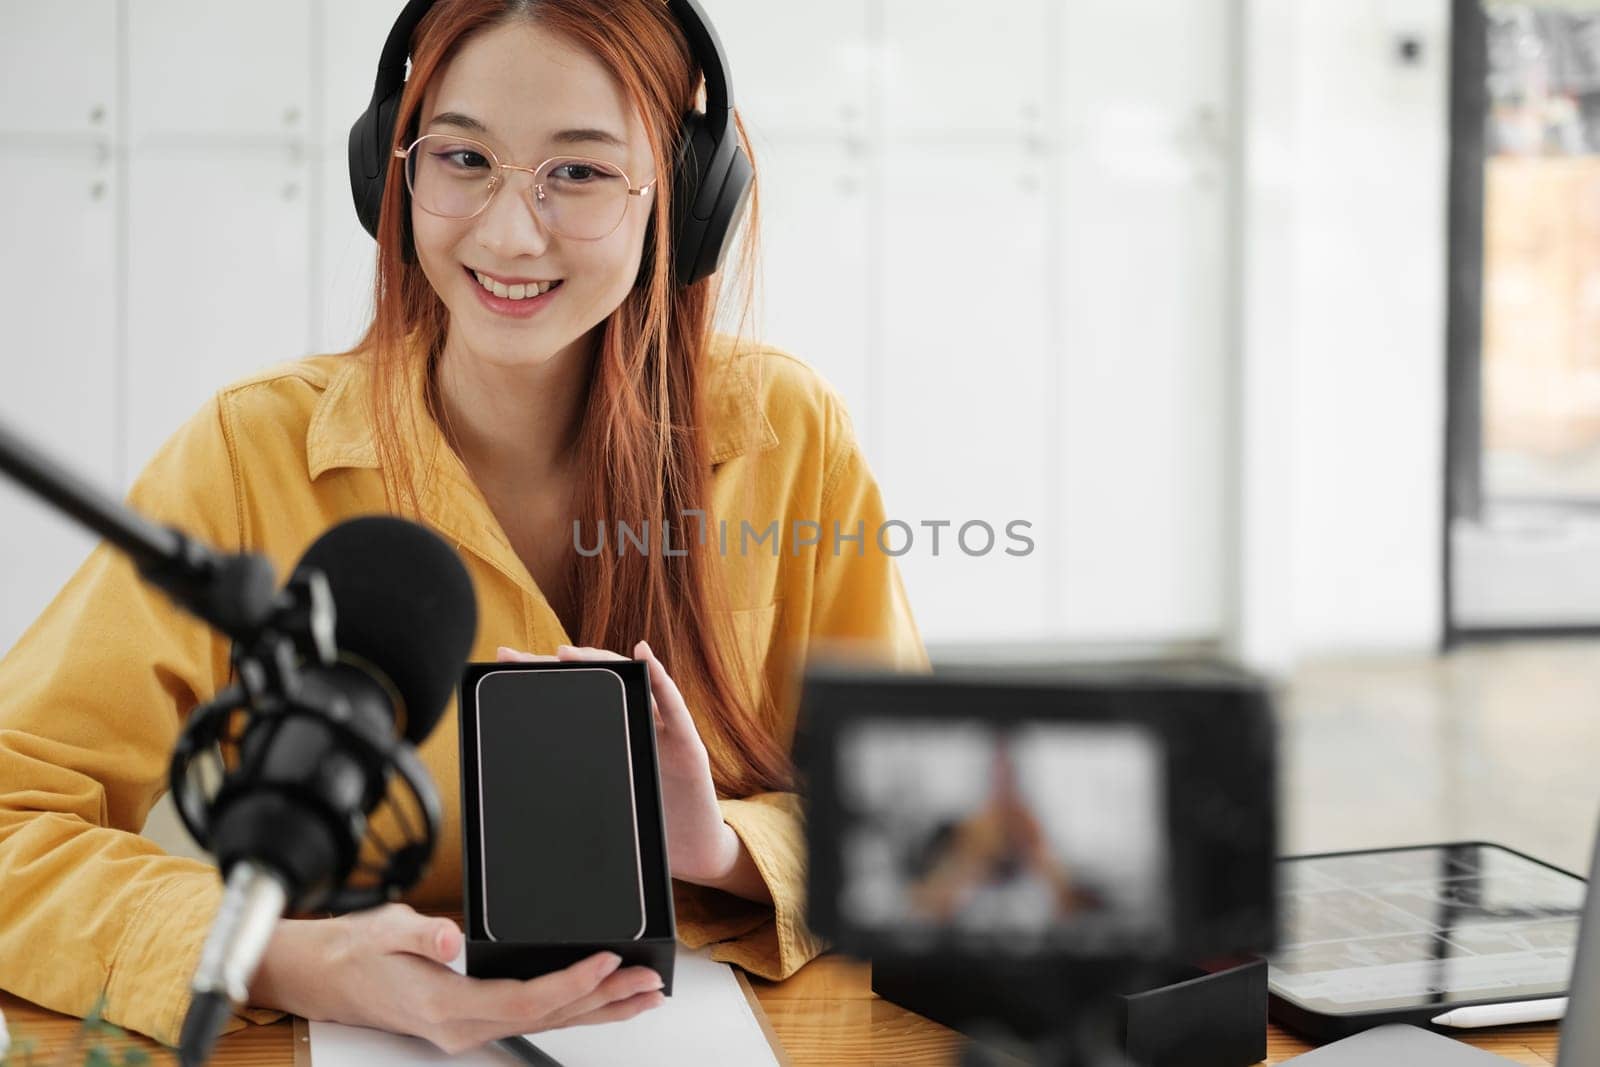 Woman recording a podcast on her laptop computer with headphones and a microscope. Female podcaster making audio podcast from her home studio.